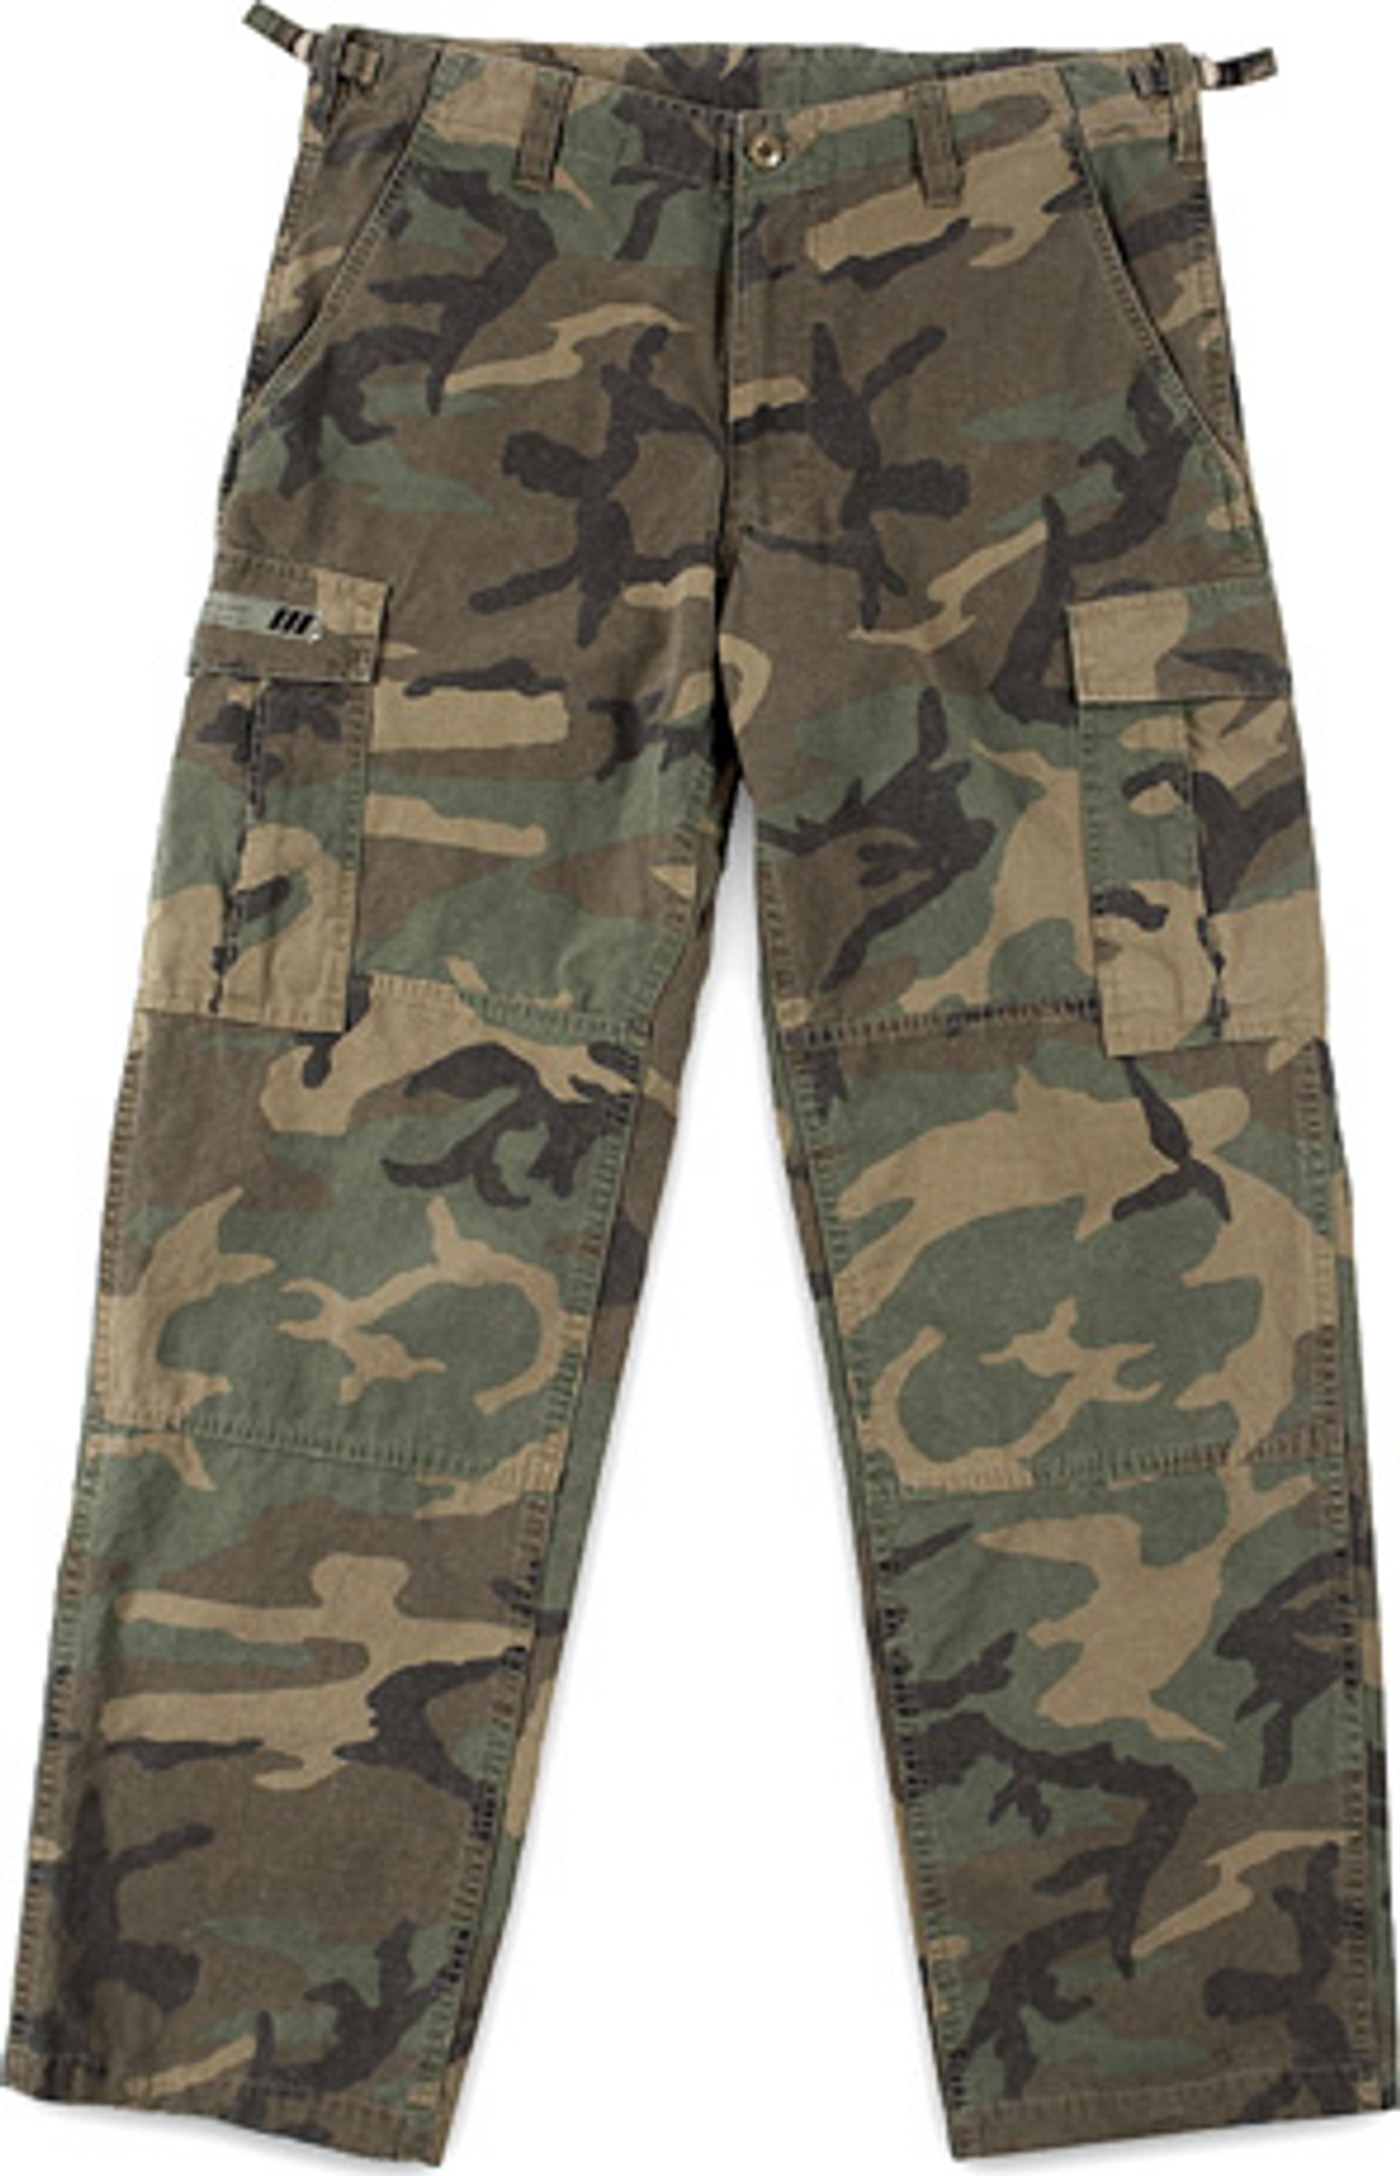 Cargo Pants 
All cotton. (4/12)